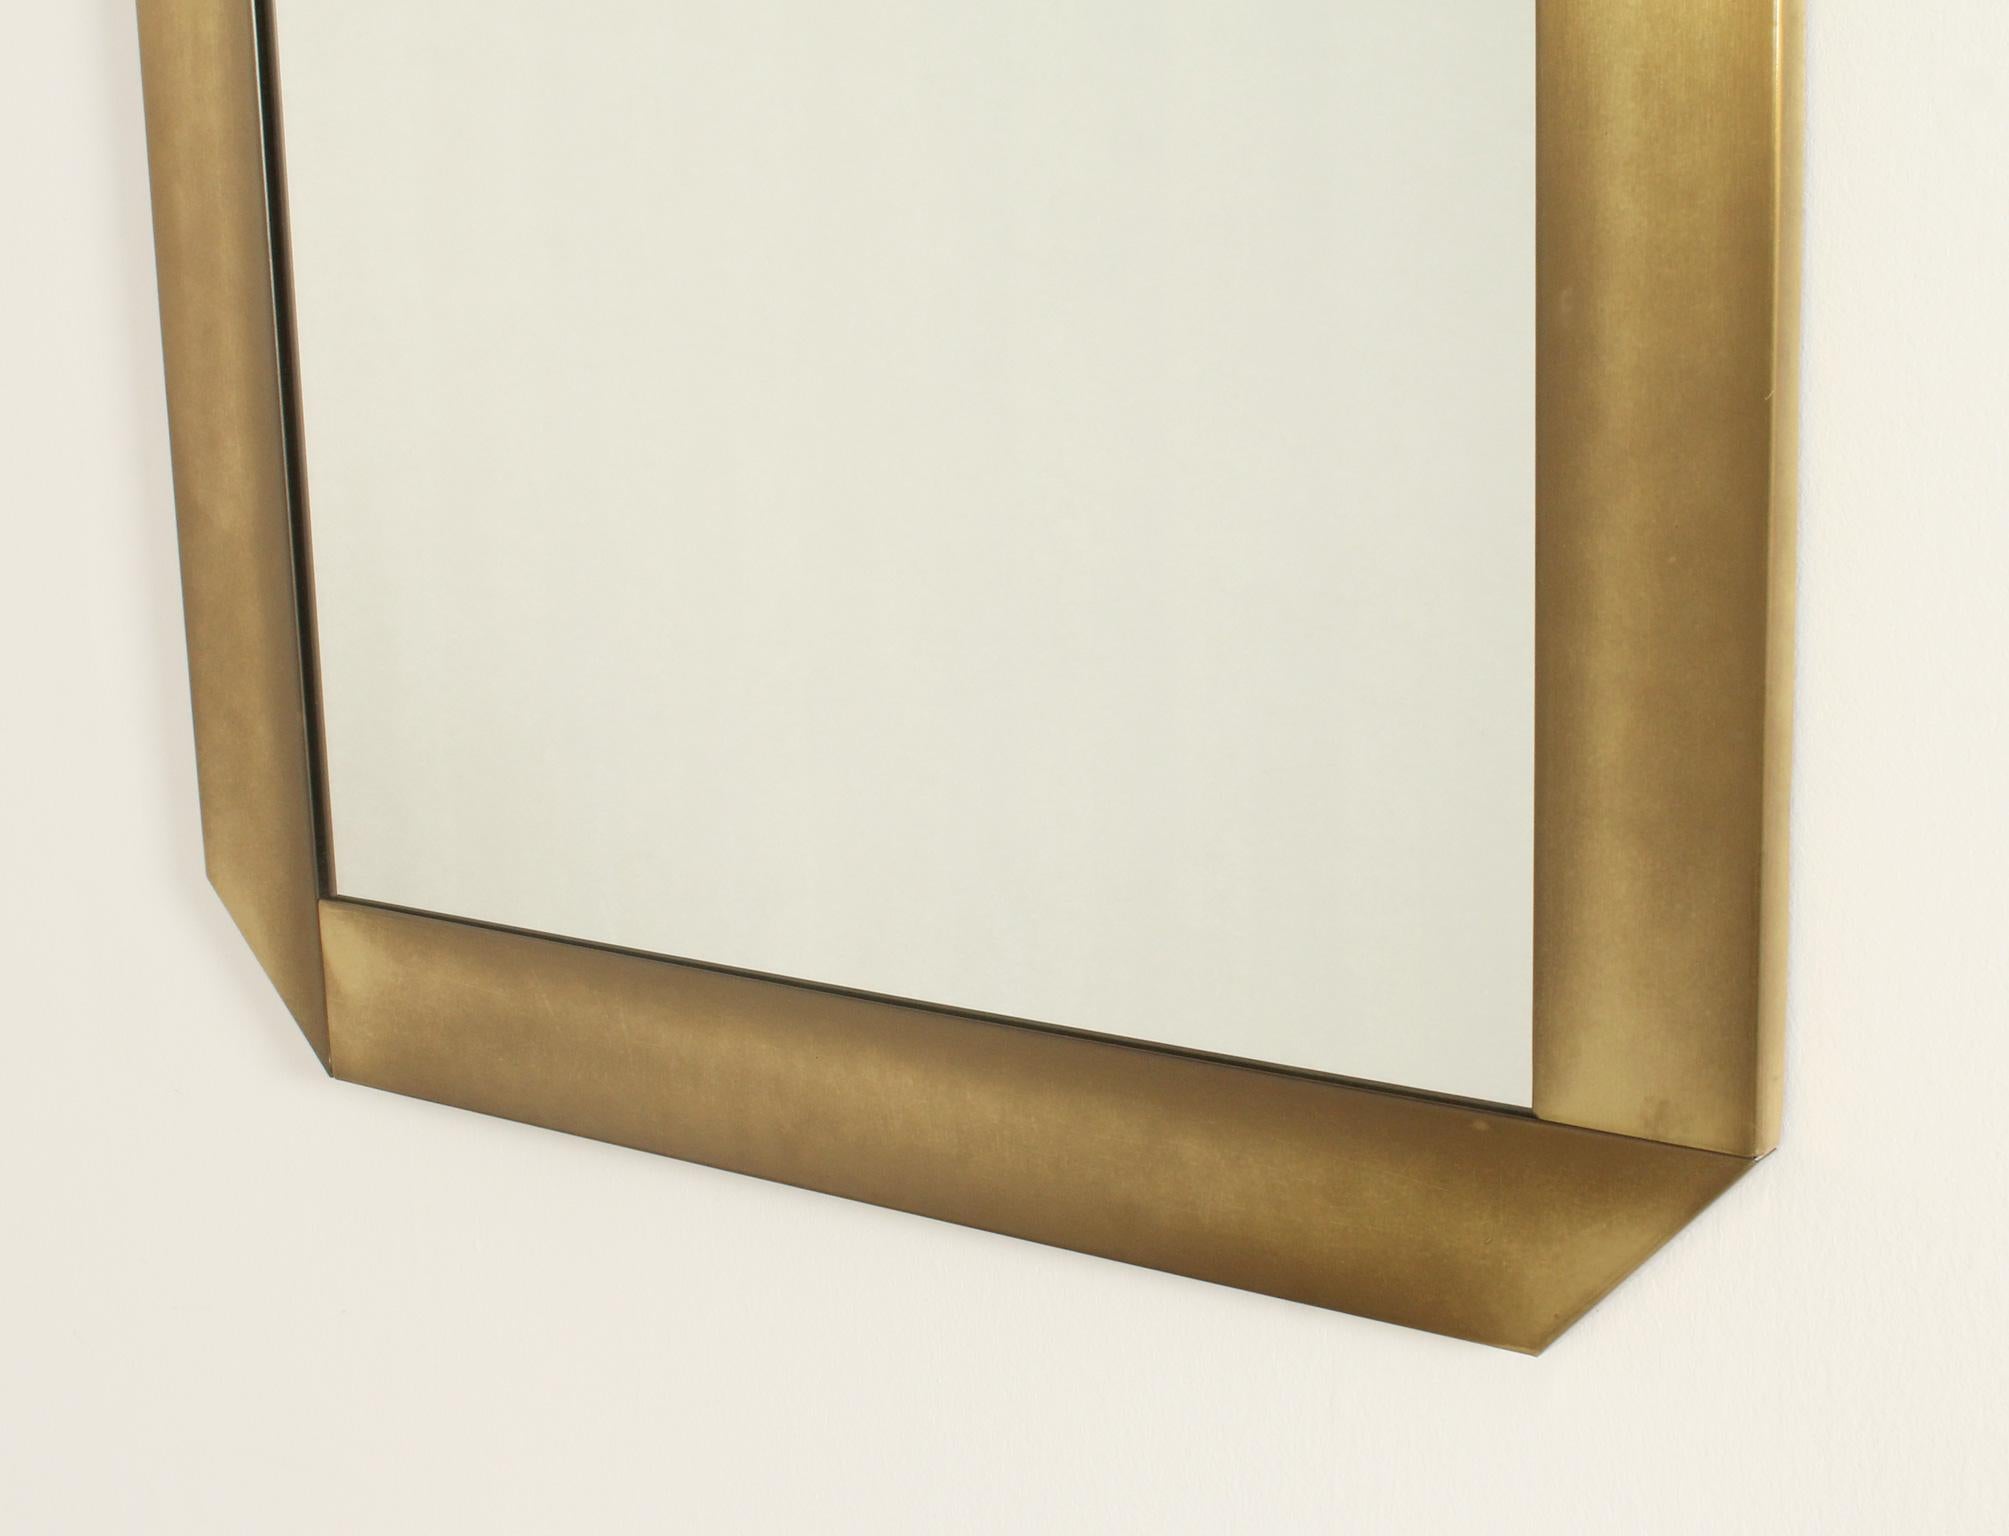 Italian Brushed Brass Wall Mirror by Valenti, Italy, 1970's